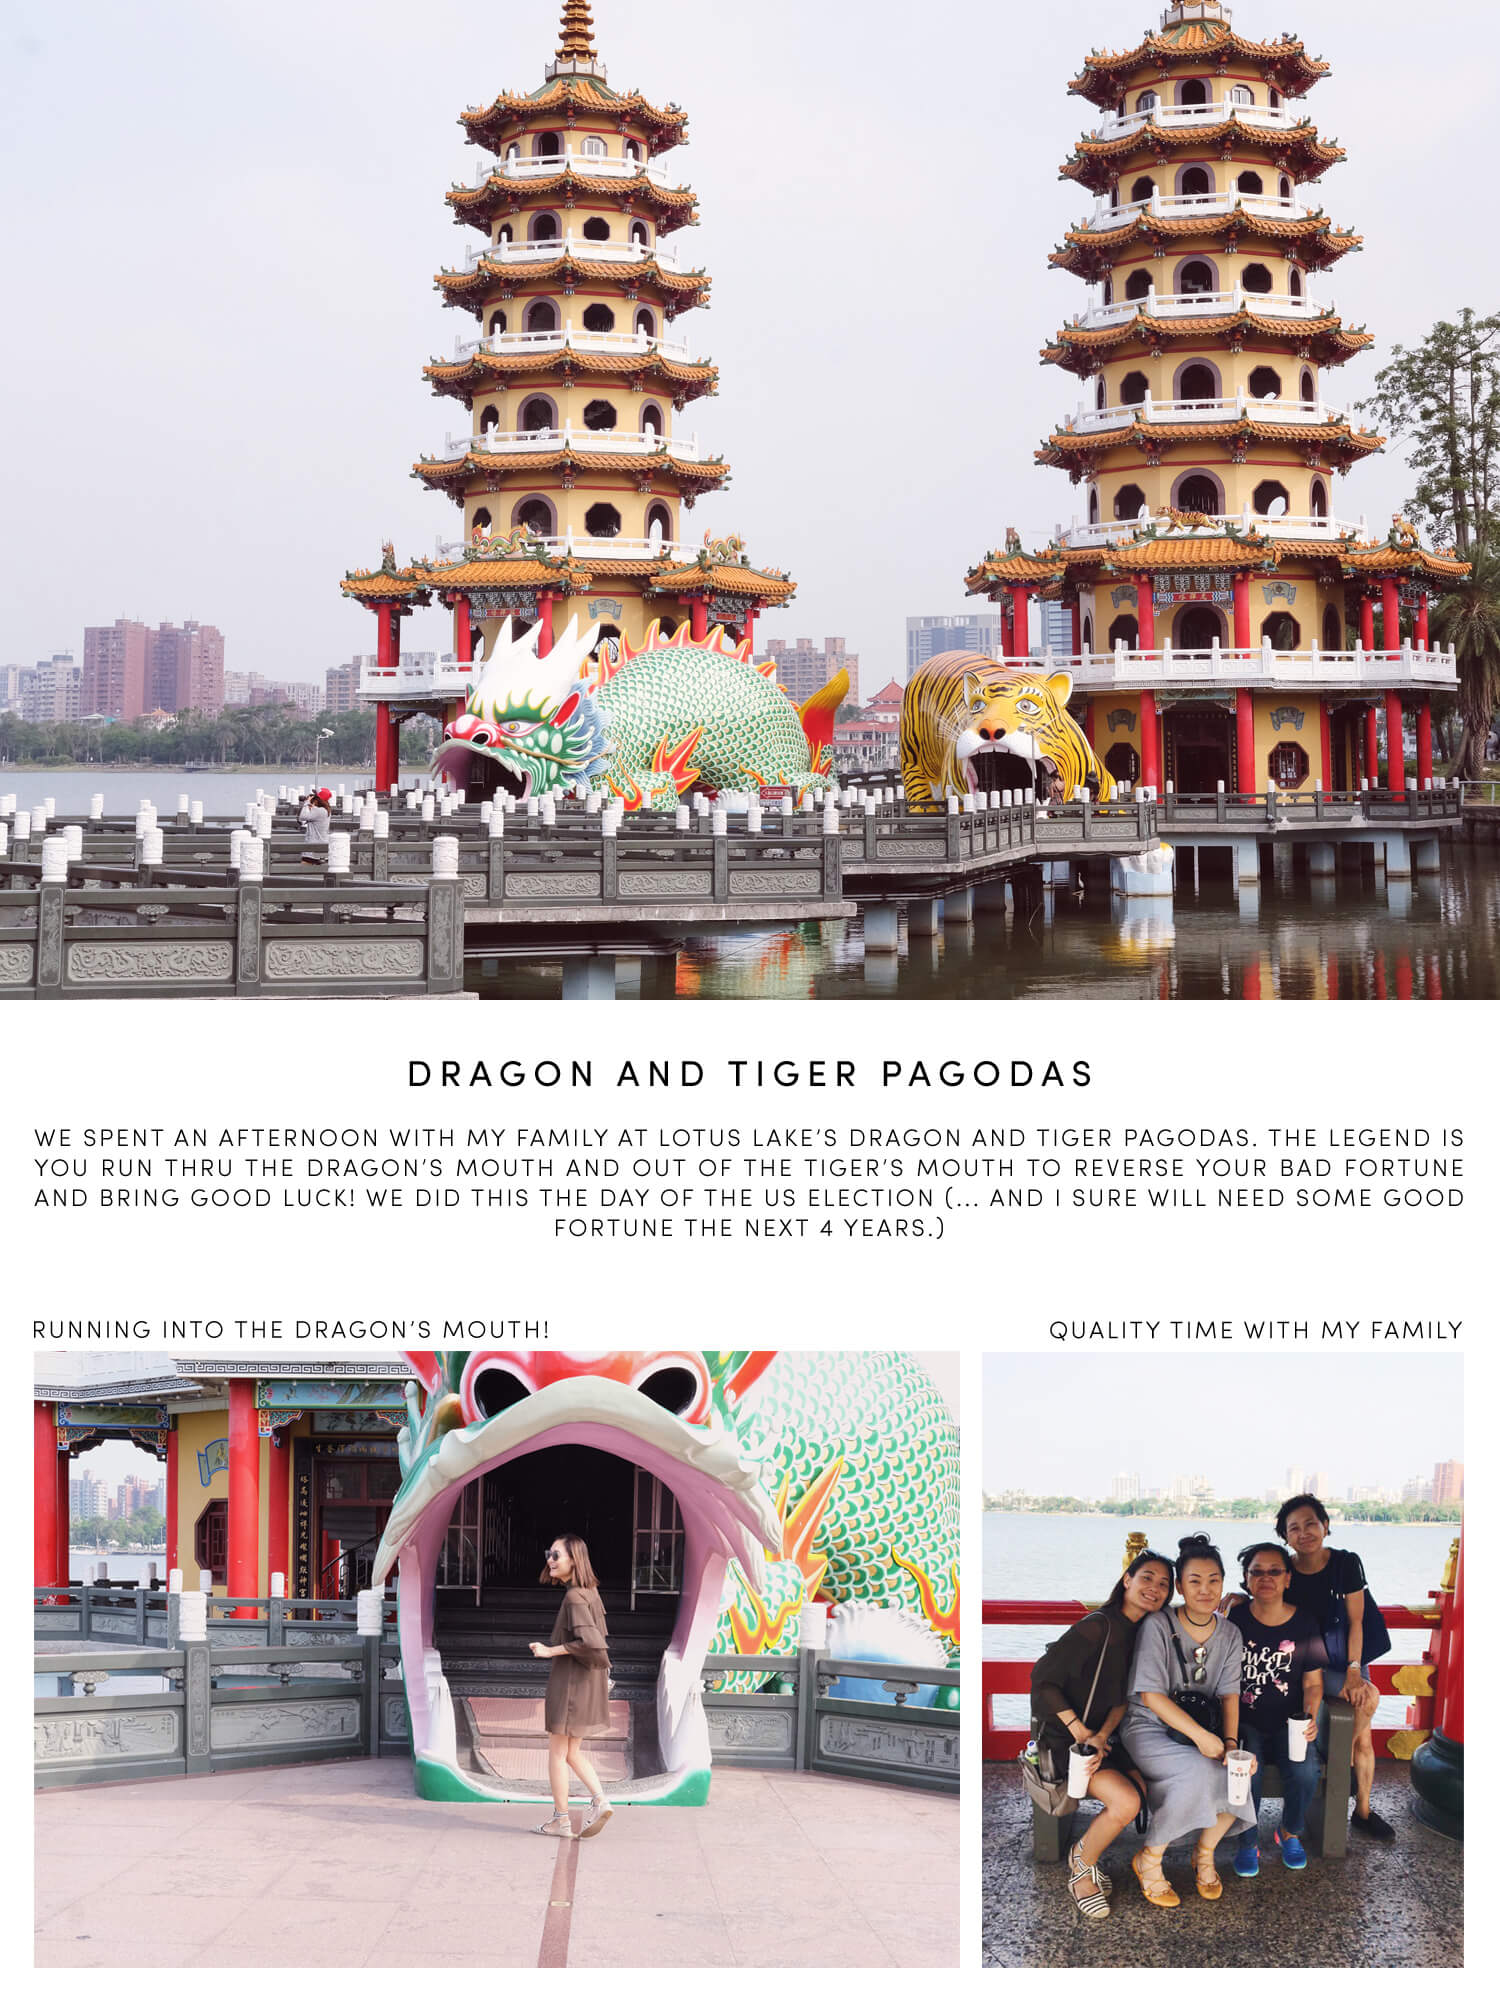 Guide to Kaohsiung Taiwan - Things To Do in Kaohsiung - Dragon and Tiger Pagodas - Lotus Lake